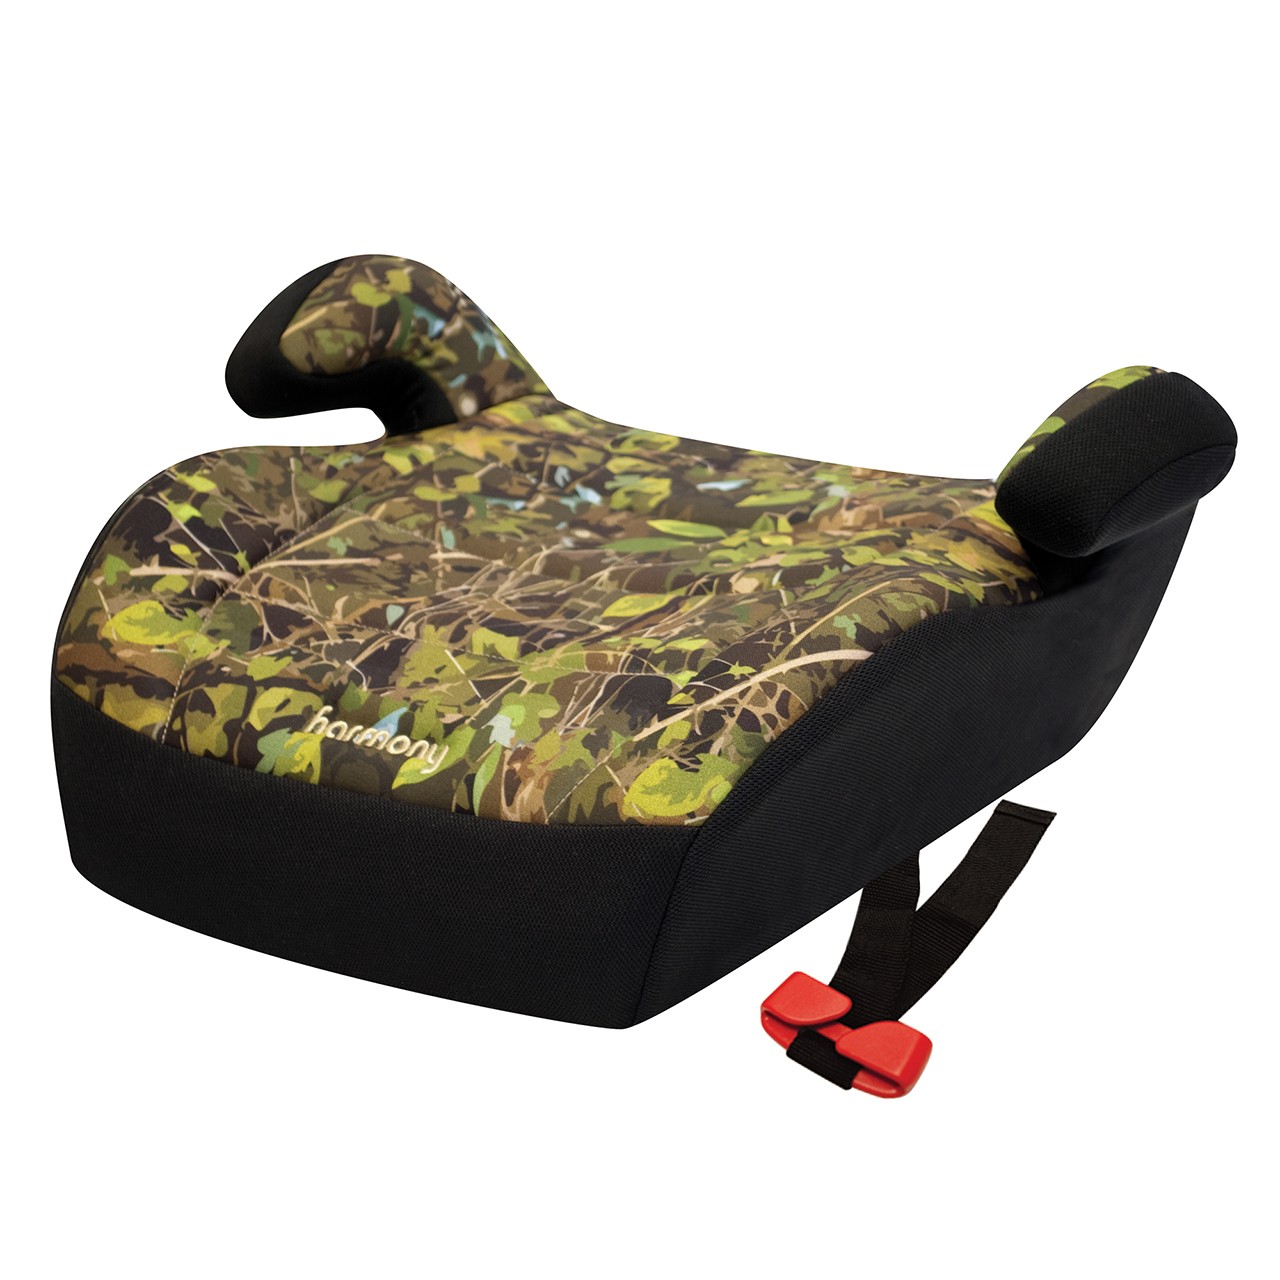 Youth Booster - Asiento elevador - Roble